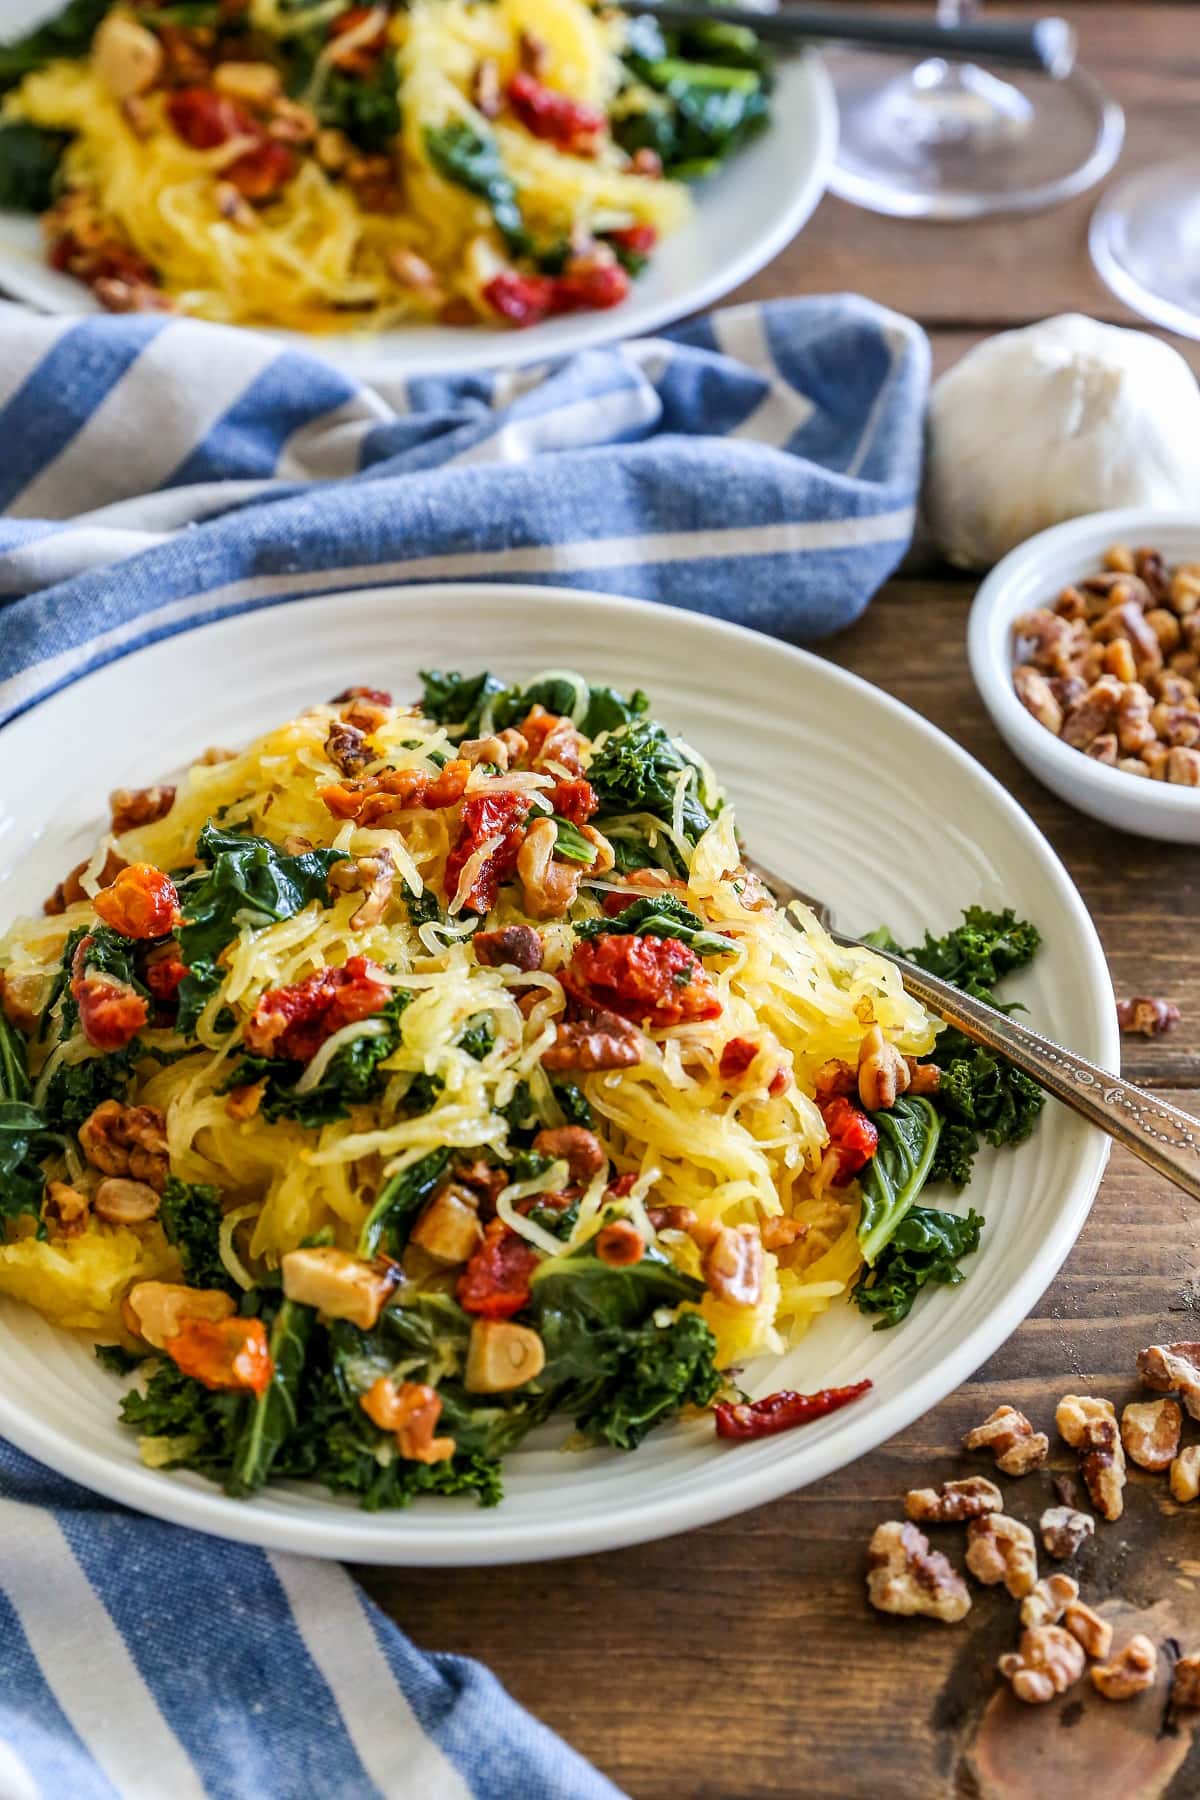 Roasted Garlic and Kale Spaghetti Squash with Sun-Dried Tomatoes - a healthy low-carb vegetarian meal | TheRoastedRoot.net #dinner #recipe #vegan